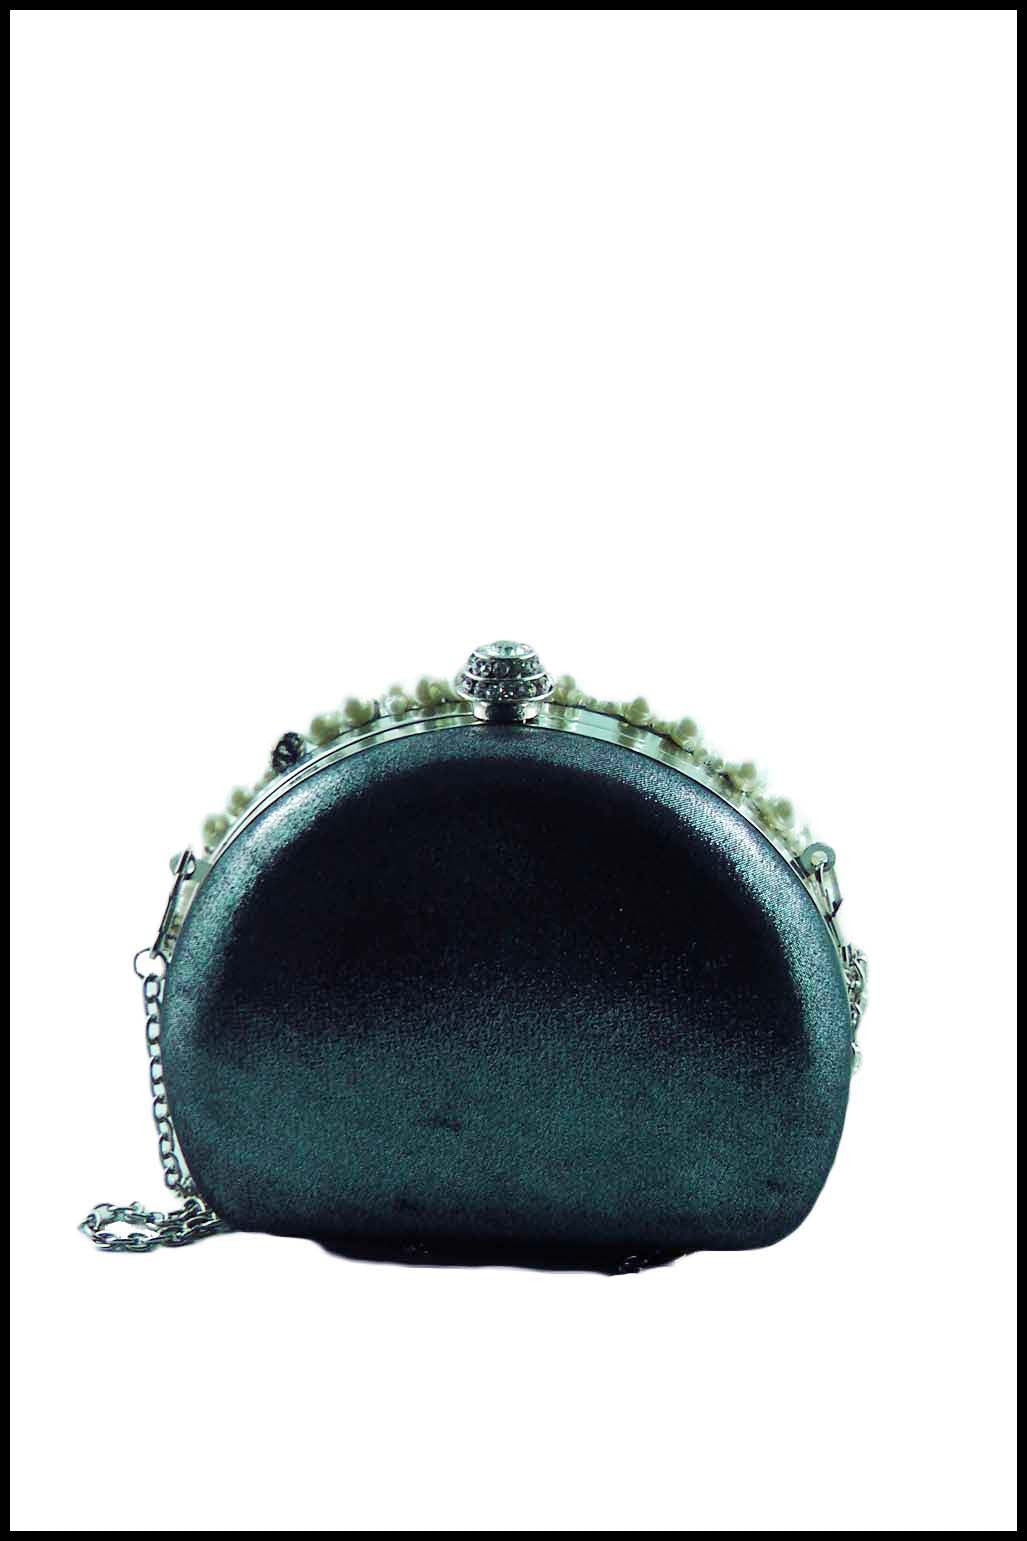 Hard-shell Rhinestone and Pearl Cluster Evening Clutch